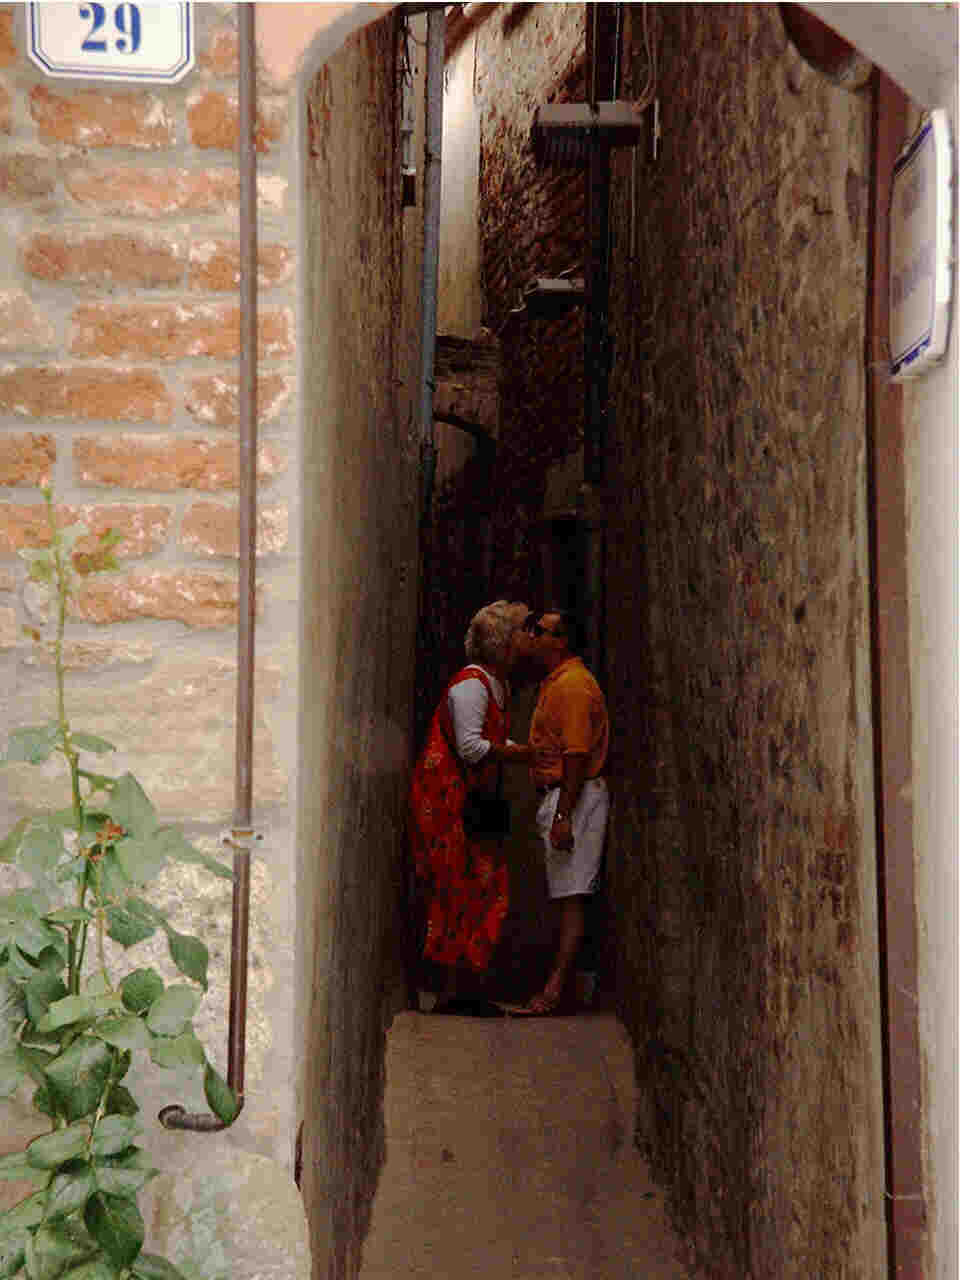 Narrowest street in Italy